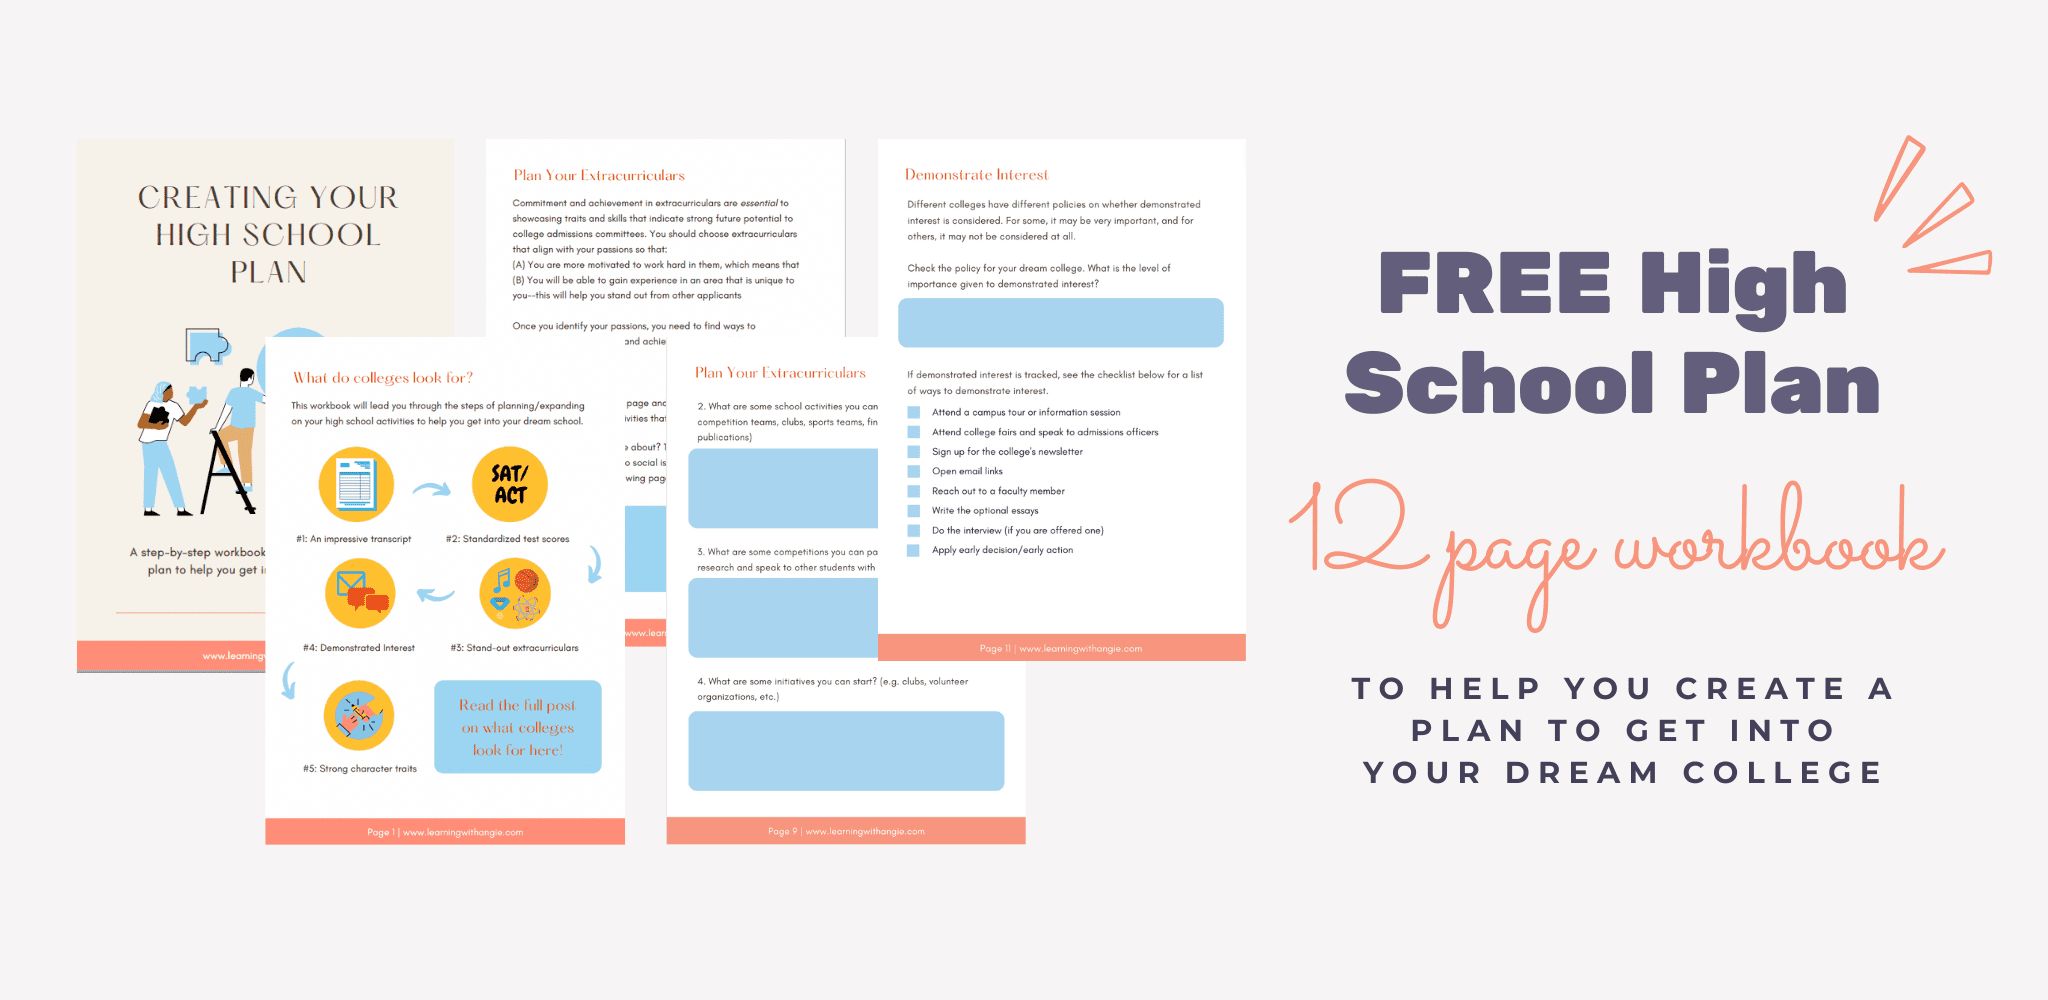 Check out this FREE 12-page high school plan workbook, meant to guide you in choosing classes, extracurriculars, and more to get into your dream college.